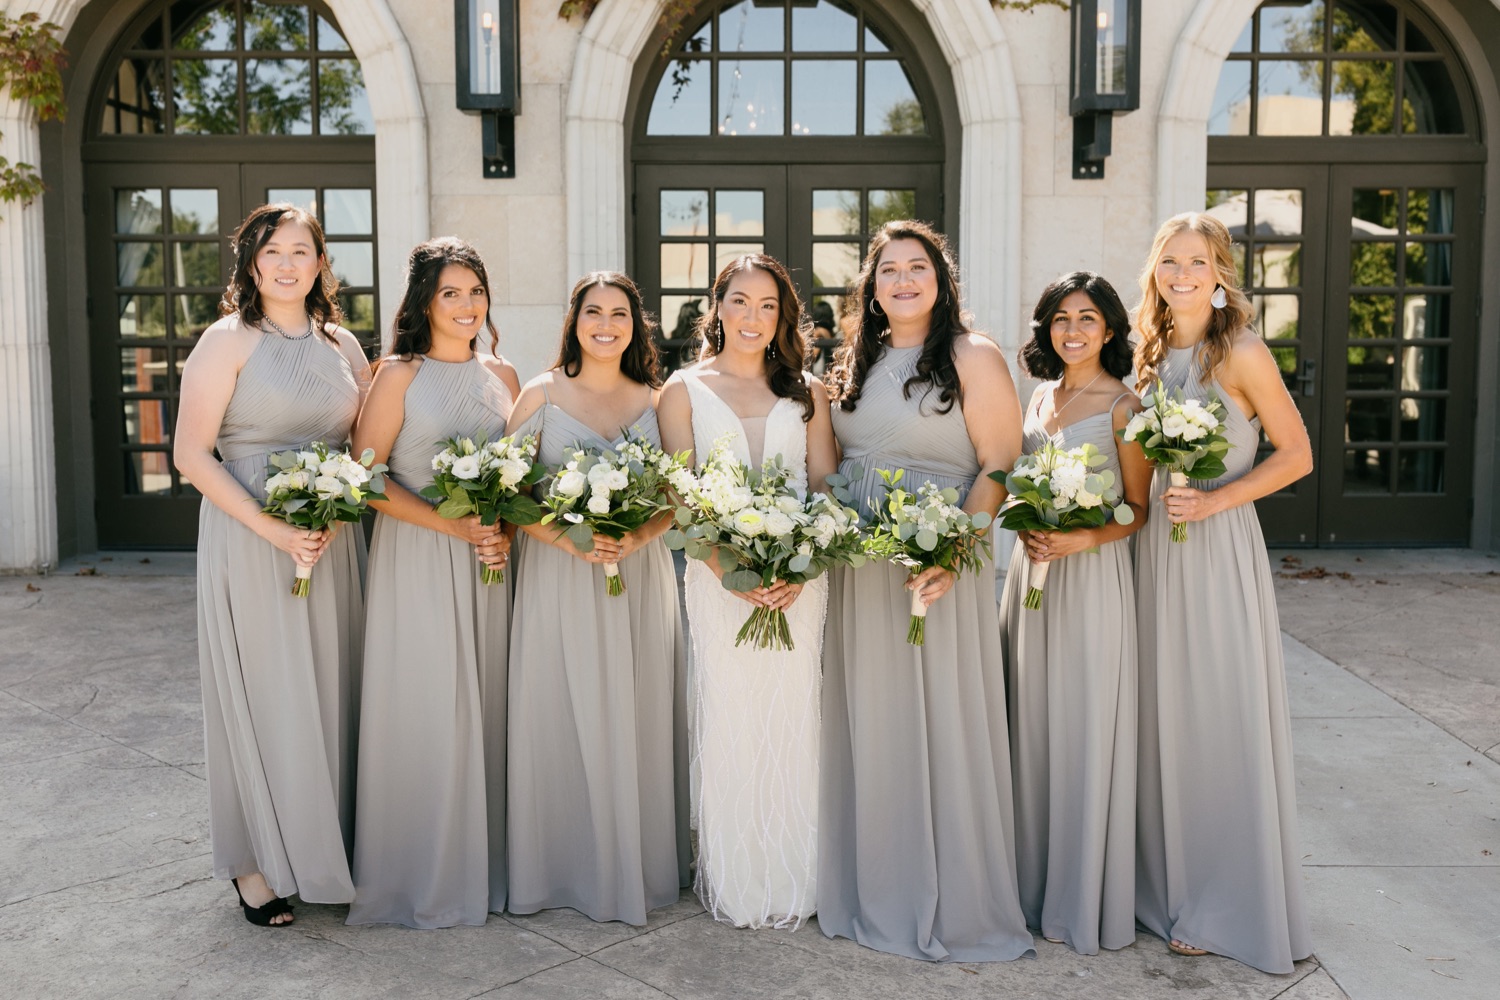 Bridesmaids portraits by tayler enerle photography at Tooth and nail winery in Paso robles, california